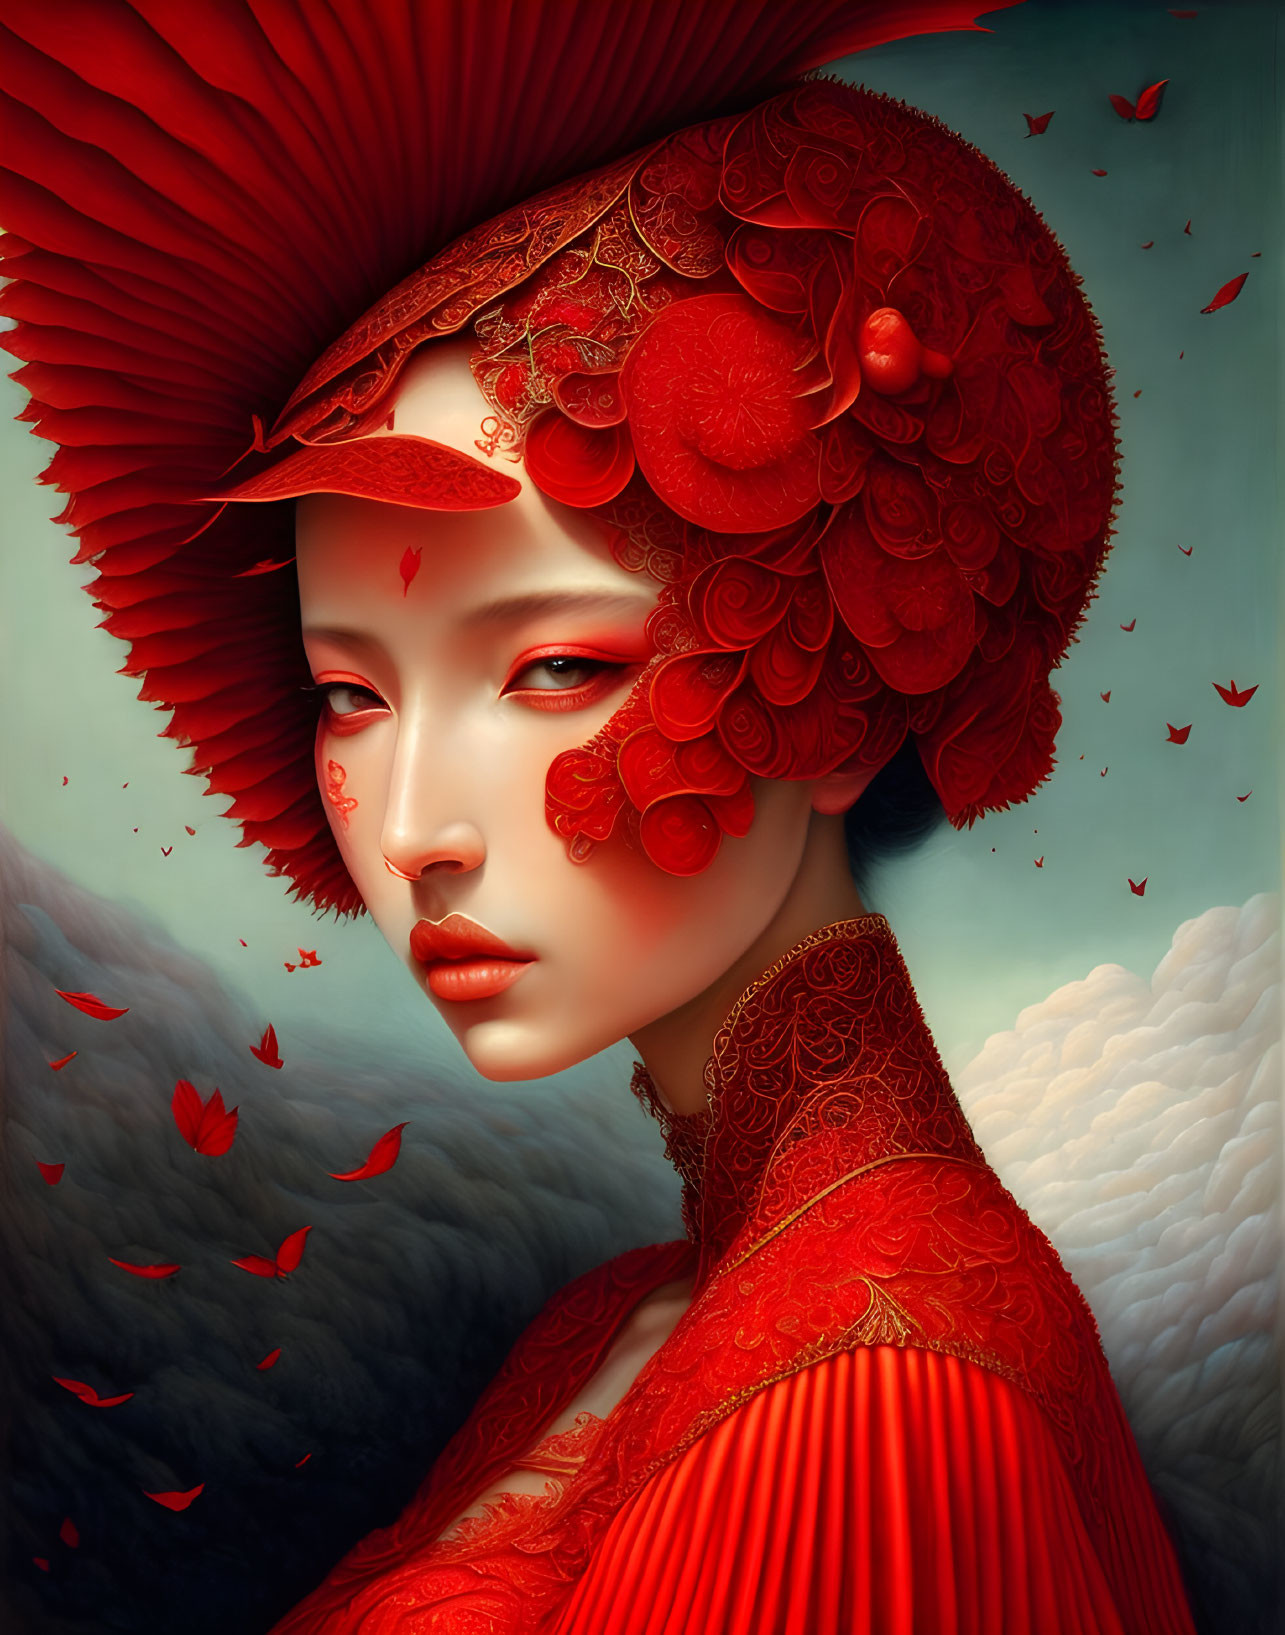 Portrait of Woman with Stylized Red Makeup and Ornate Headdress in Fantasy-Asian Fusion